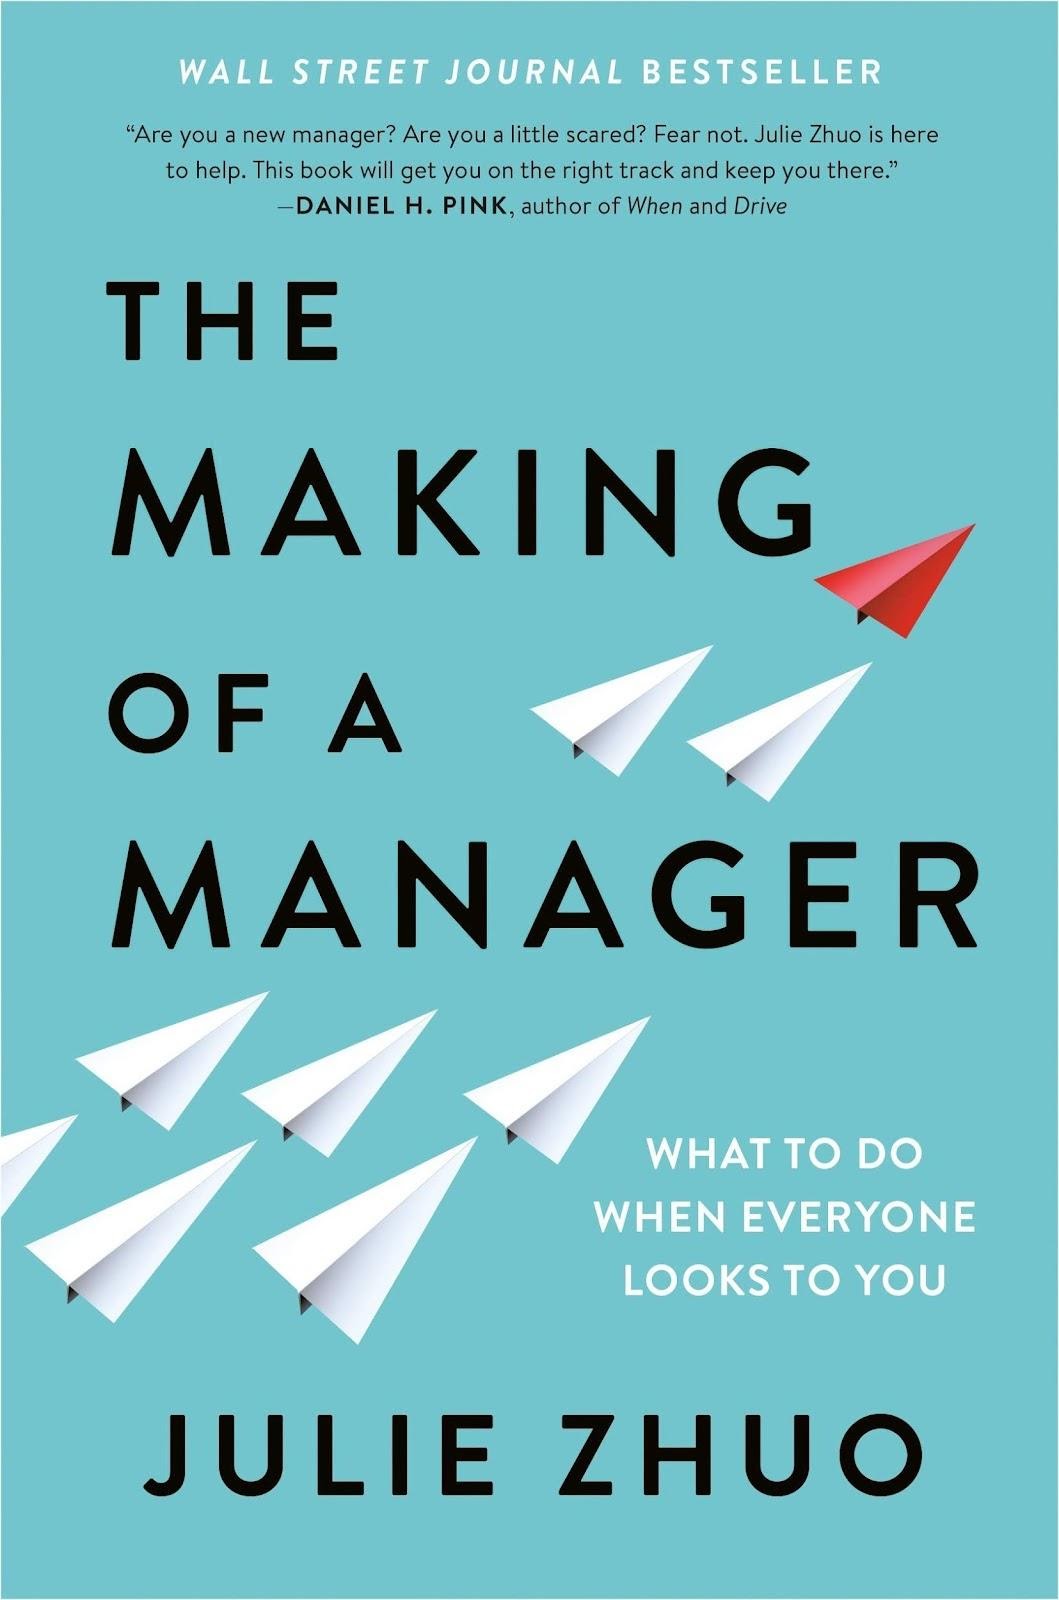 Libro “The Making of a Manager”